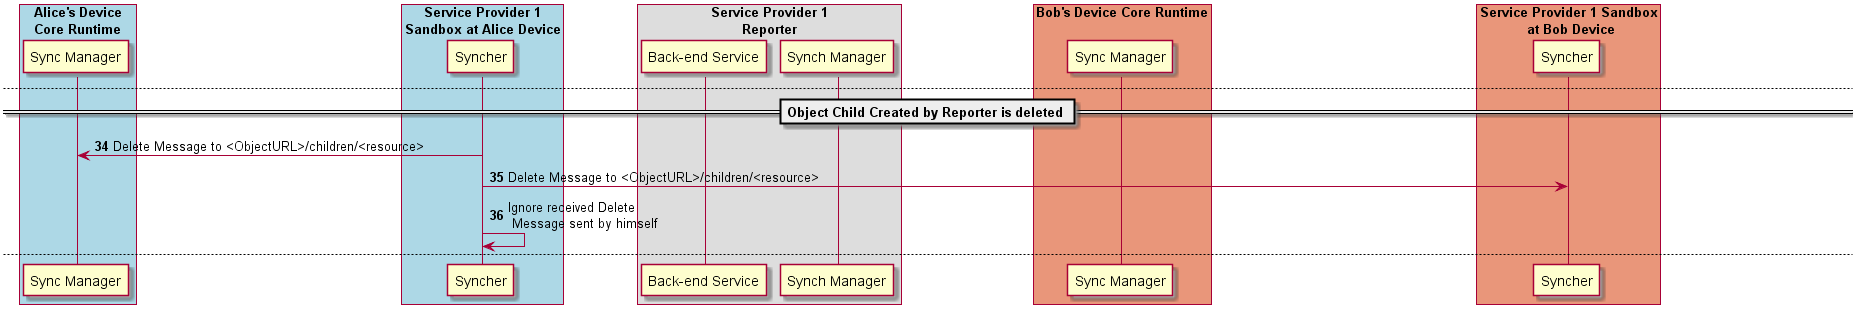 Figure @data-object-child-delete-createdby-reporter Delete of Data Object Child that was created by Data Object Parent Reporter